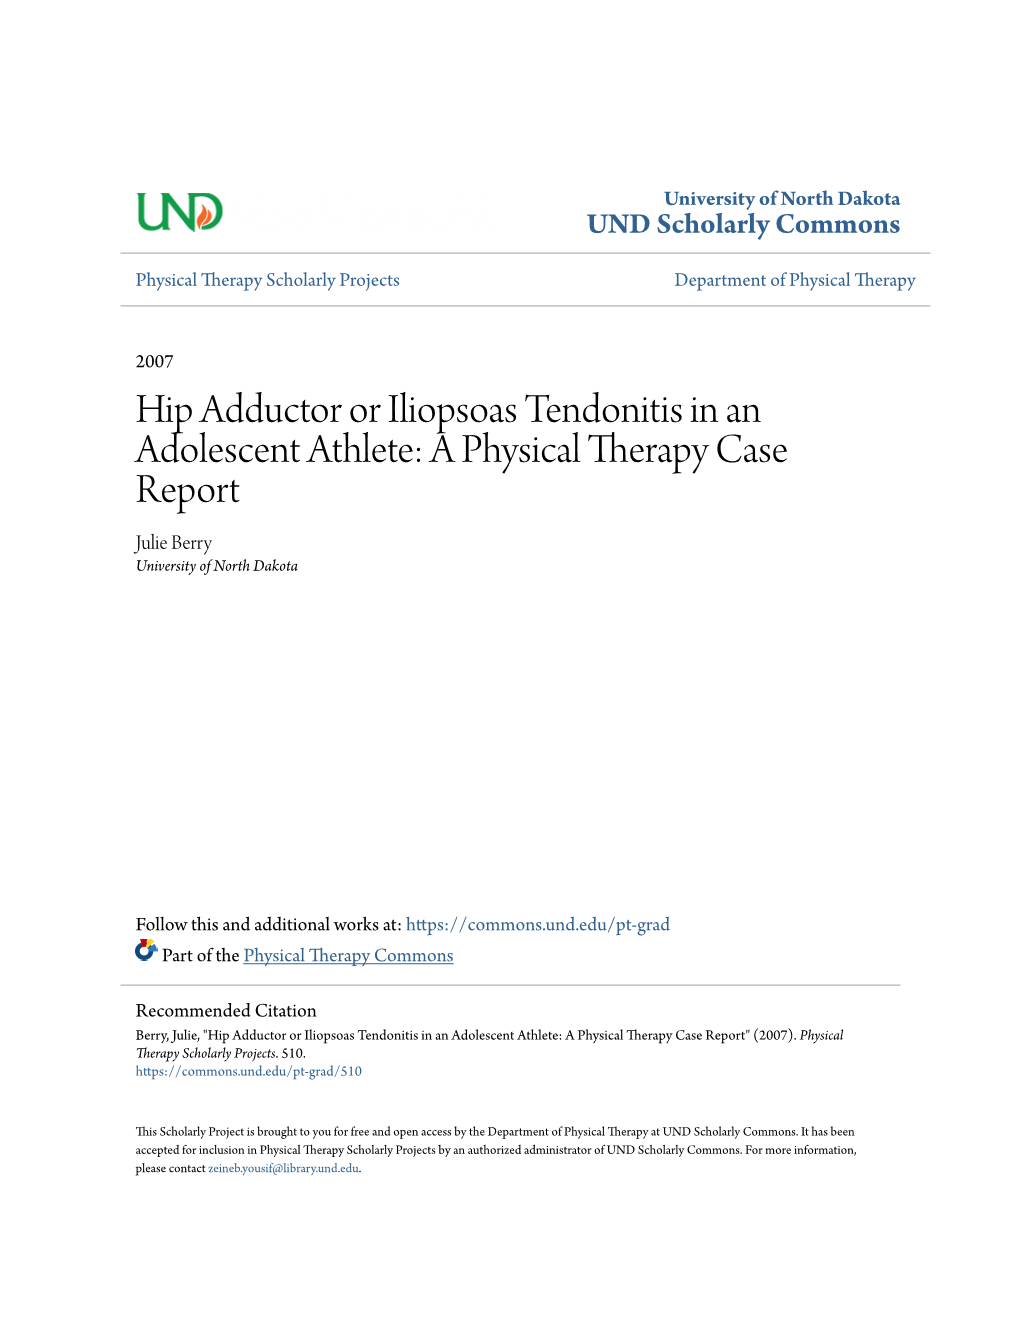 Hip Adductor Or Iliopsoas Tendonitis In An Adolescent Athlete A